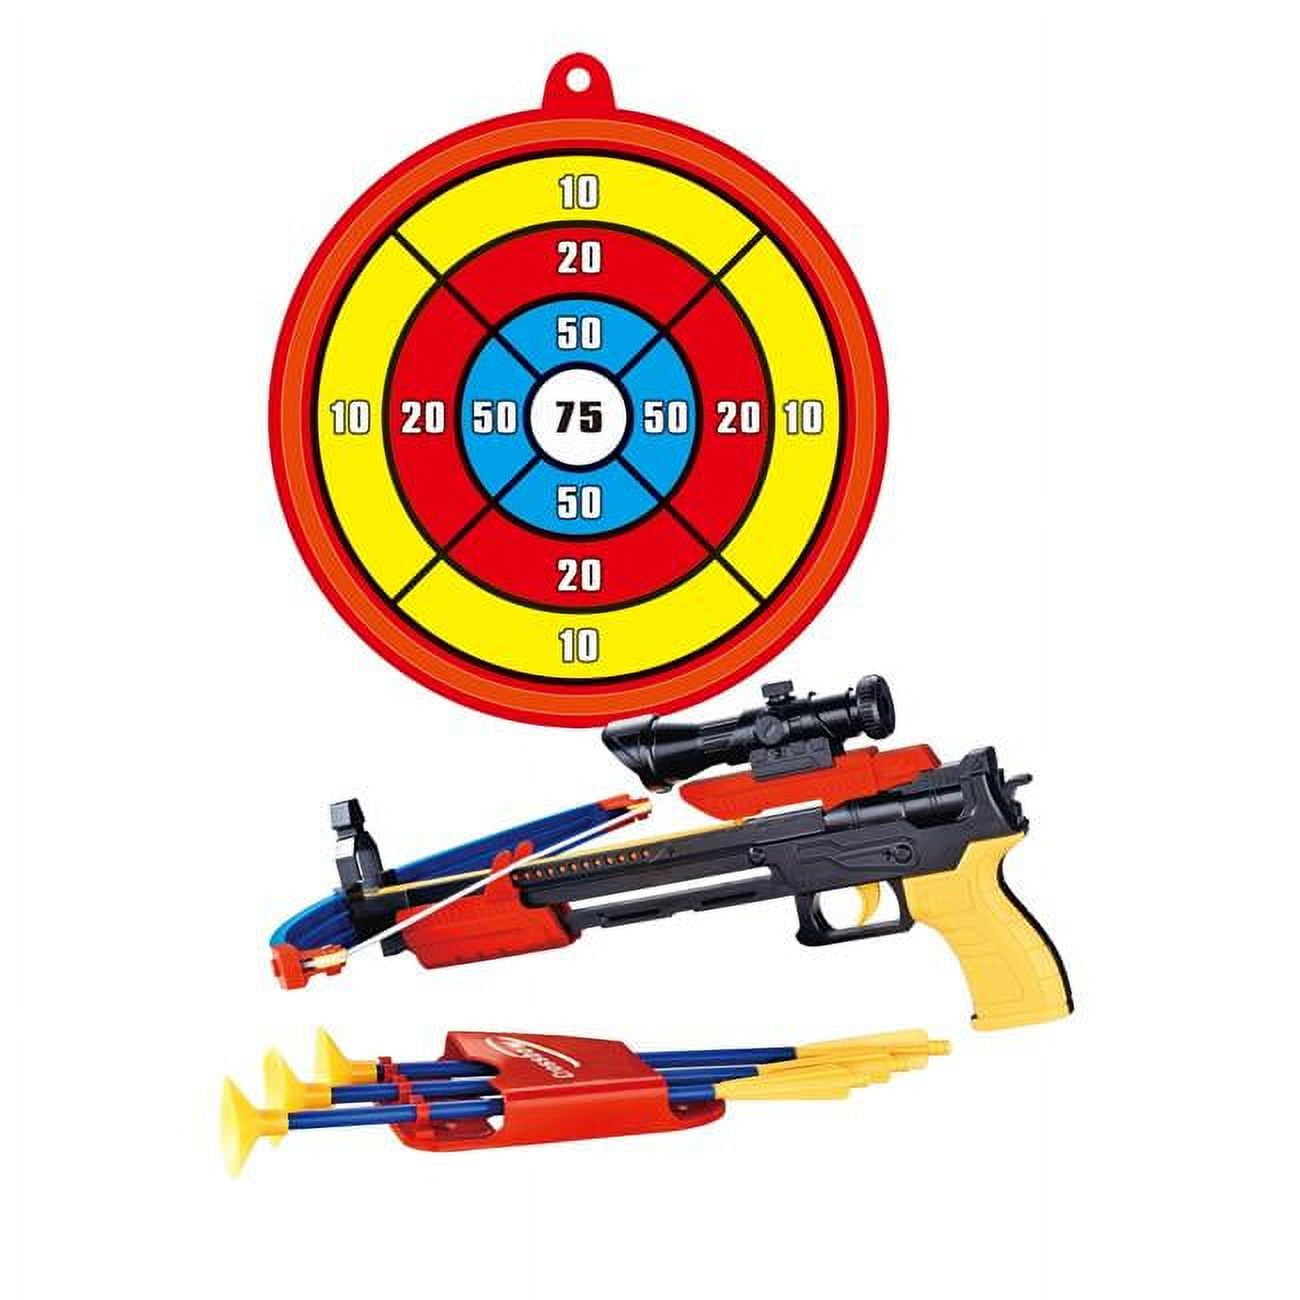 Ps0968 Archery Crossbow Bow & Arrow Toy Set With Target, Toy Crossbow For Indoor & Outdoor Garden Fun Game